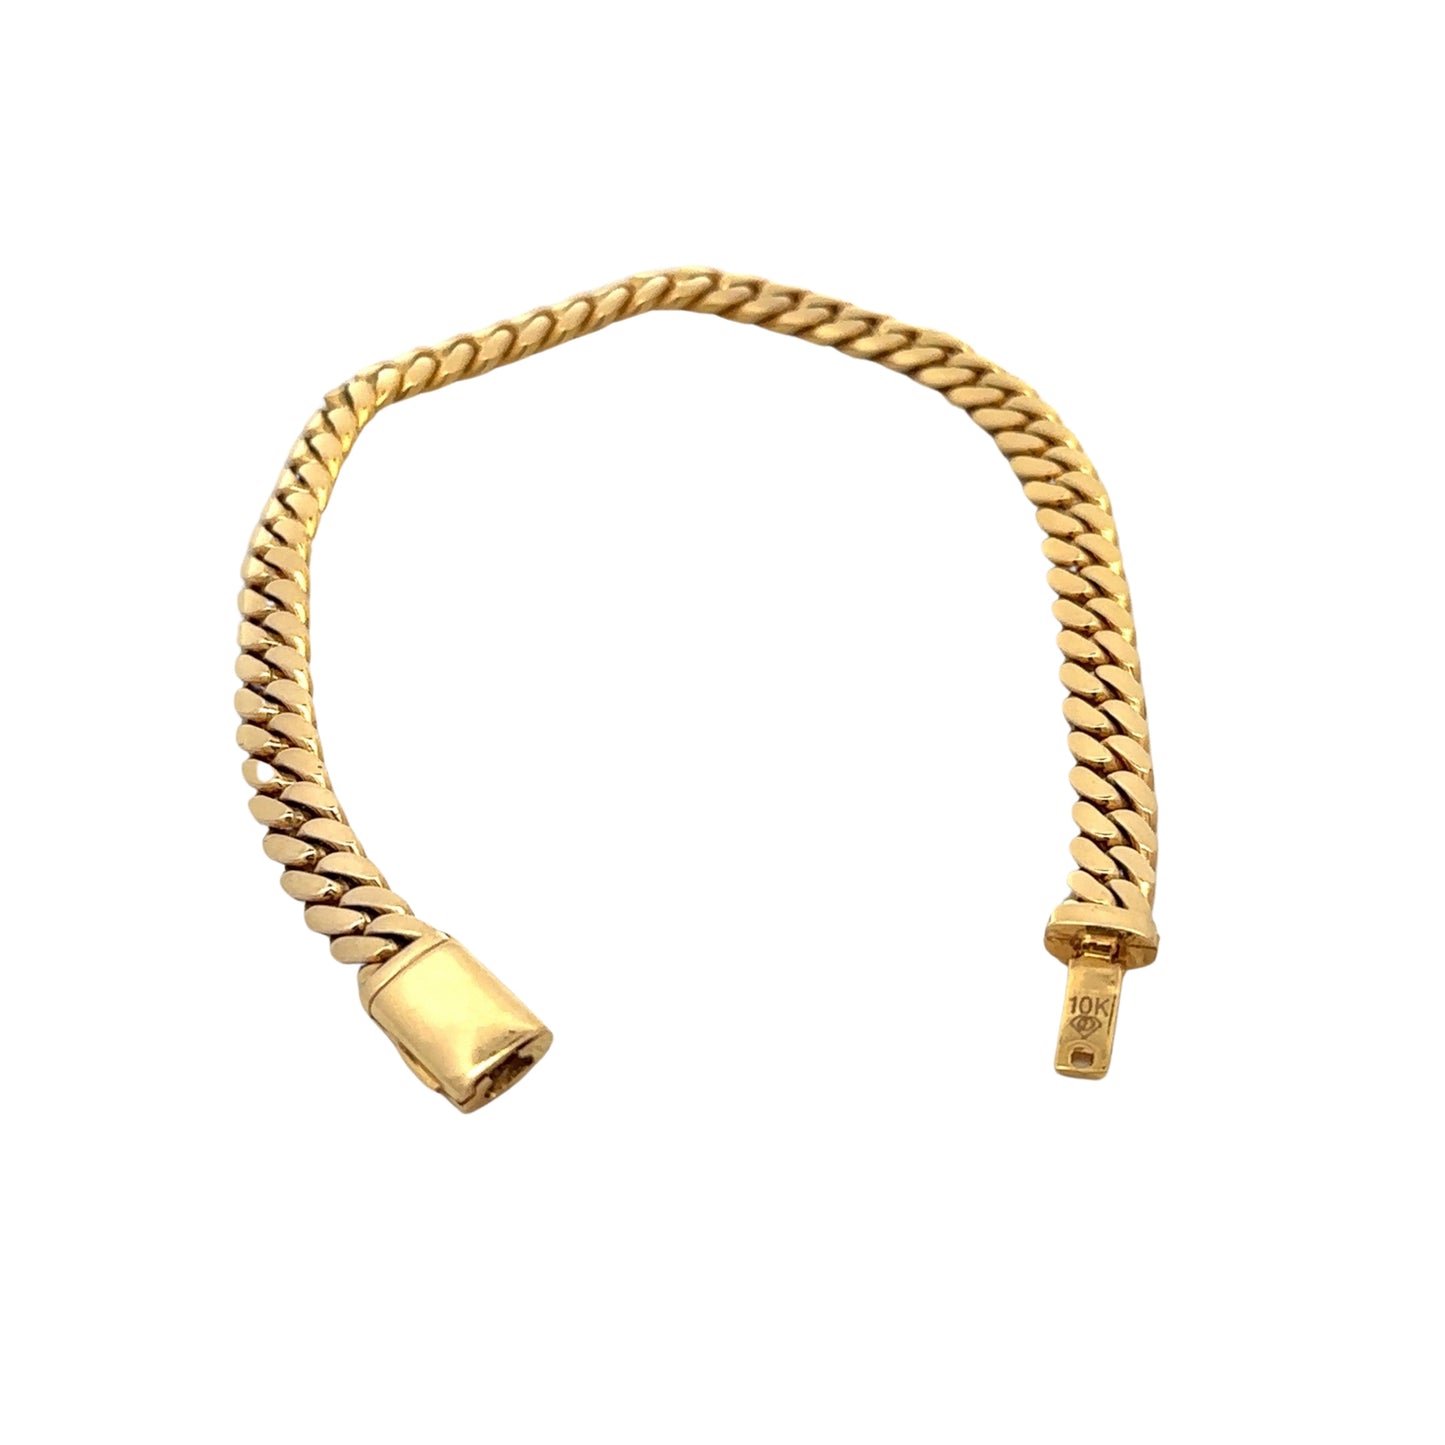 Open yellow gold Miami Cuban Link bracelet with 10K stamp on clasp